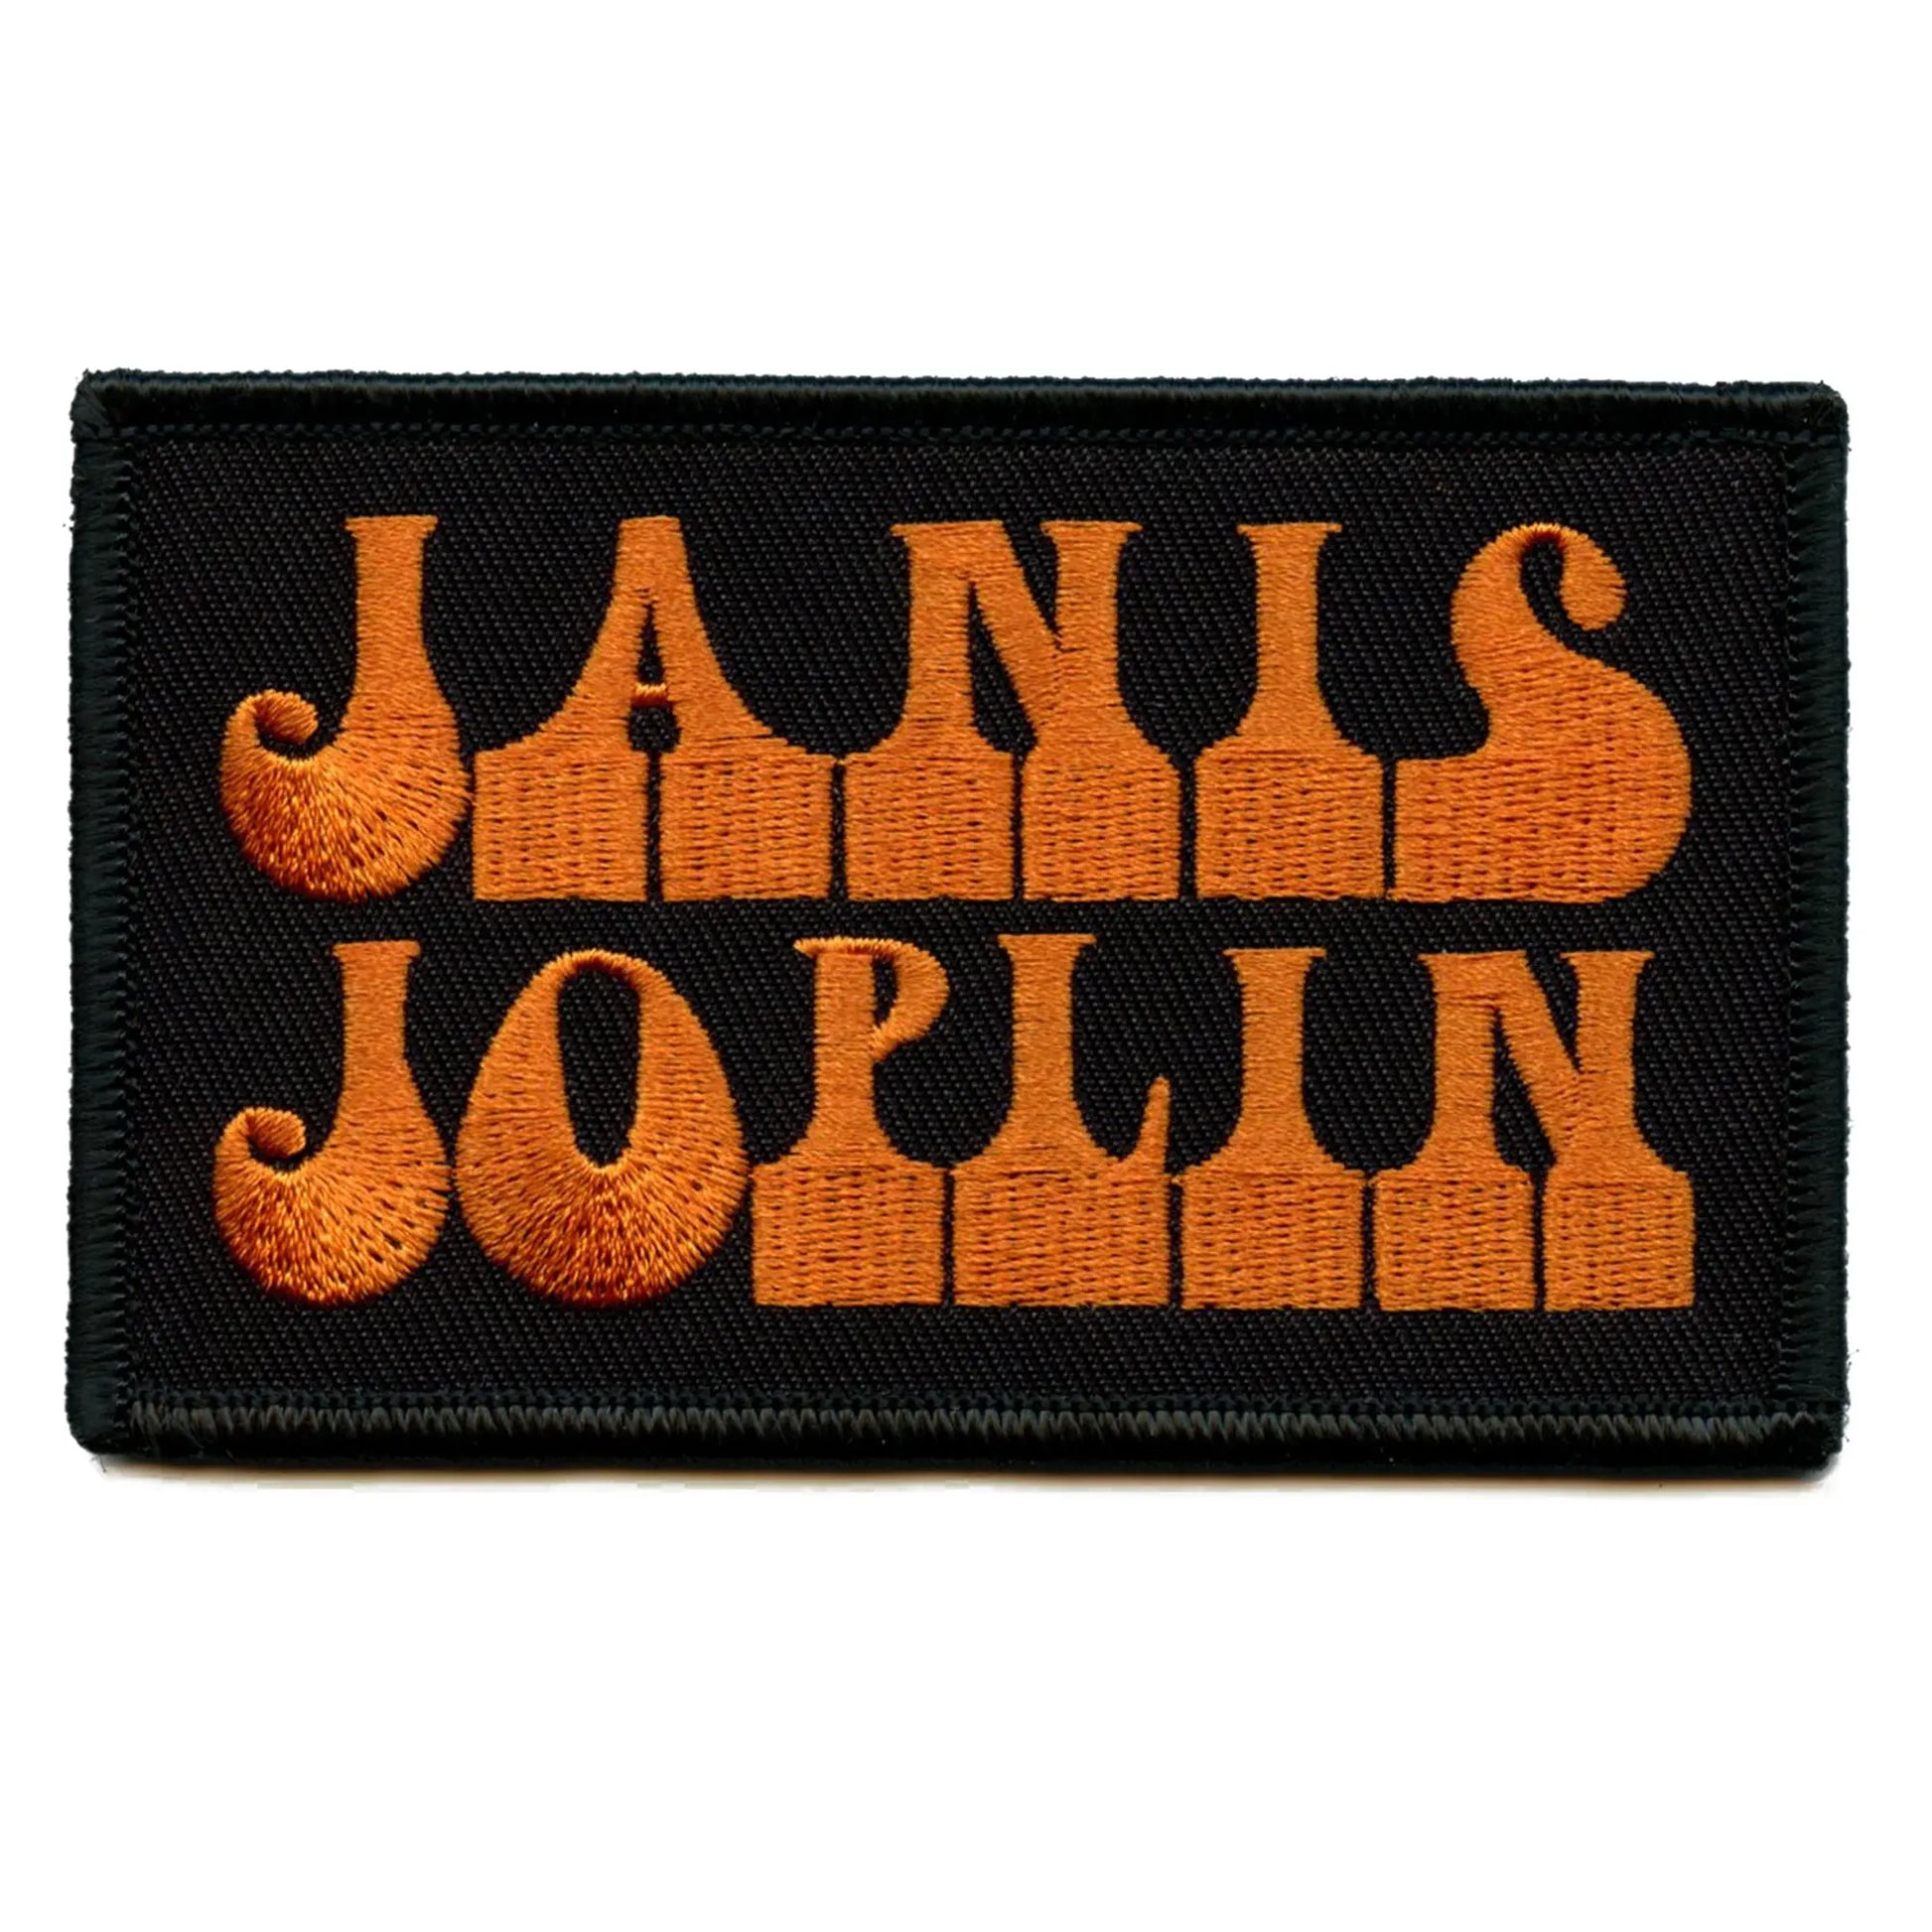 Janis Joplin Classic Logo Patch Woman Rock Legend Embroidered Iron On